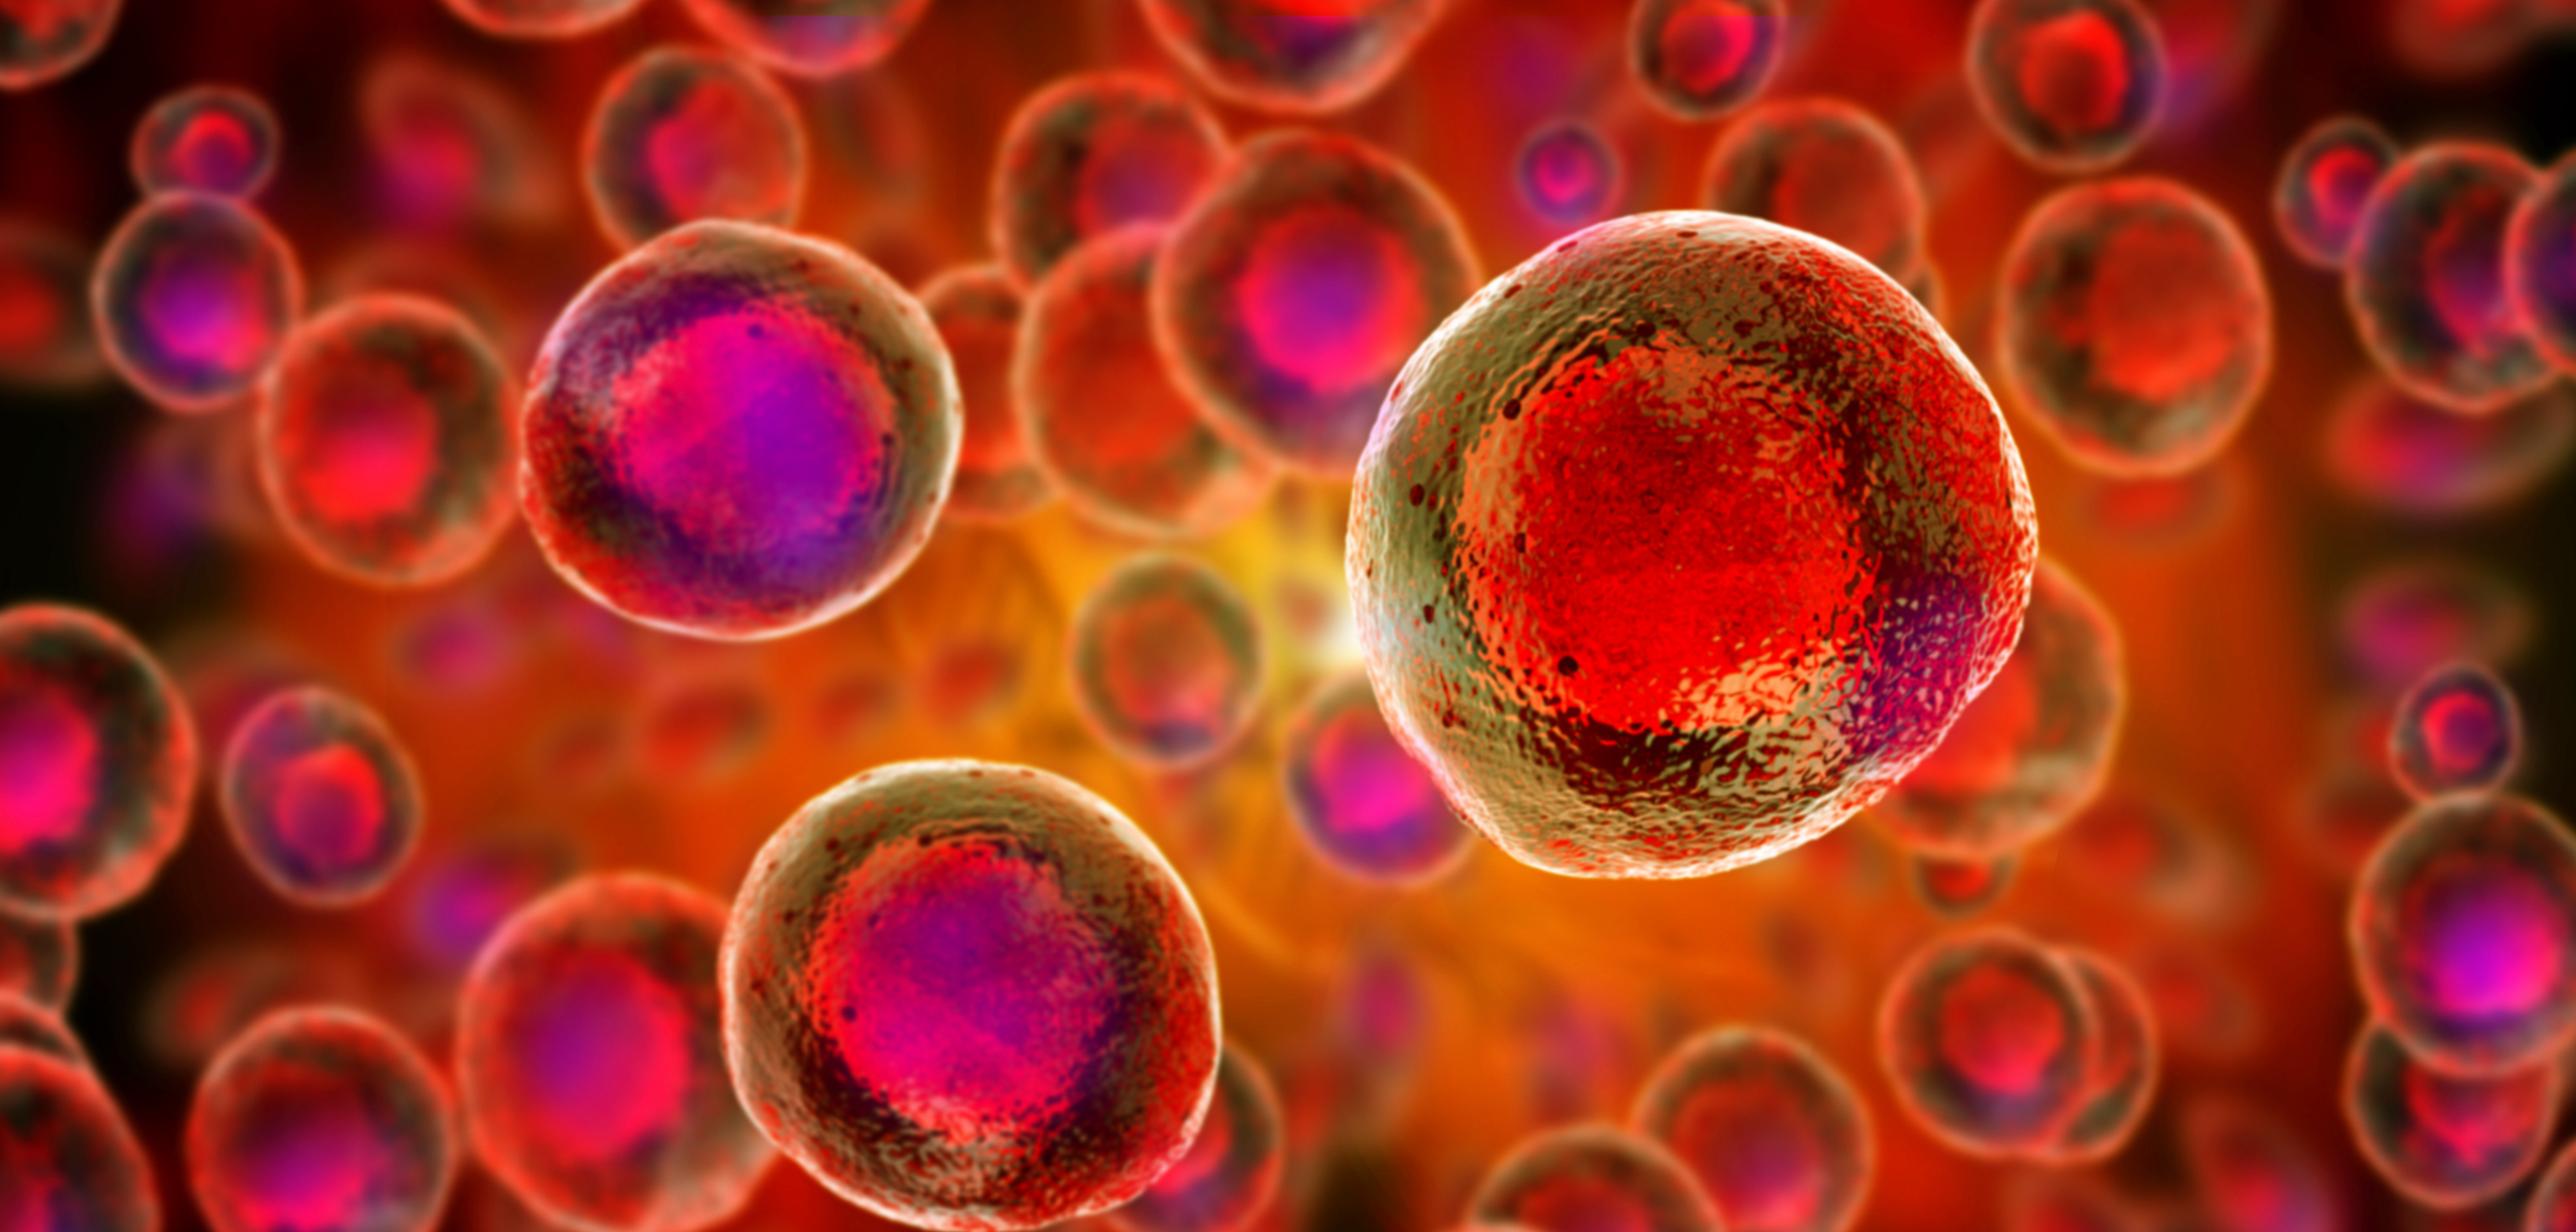 Misinformation rampant about unapproved stem cell therapies